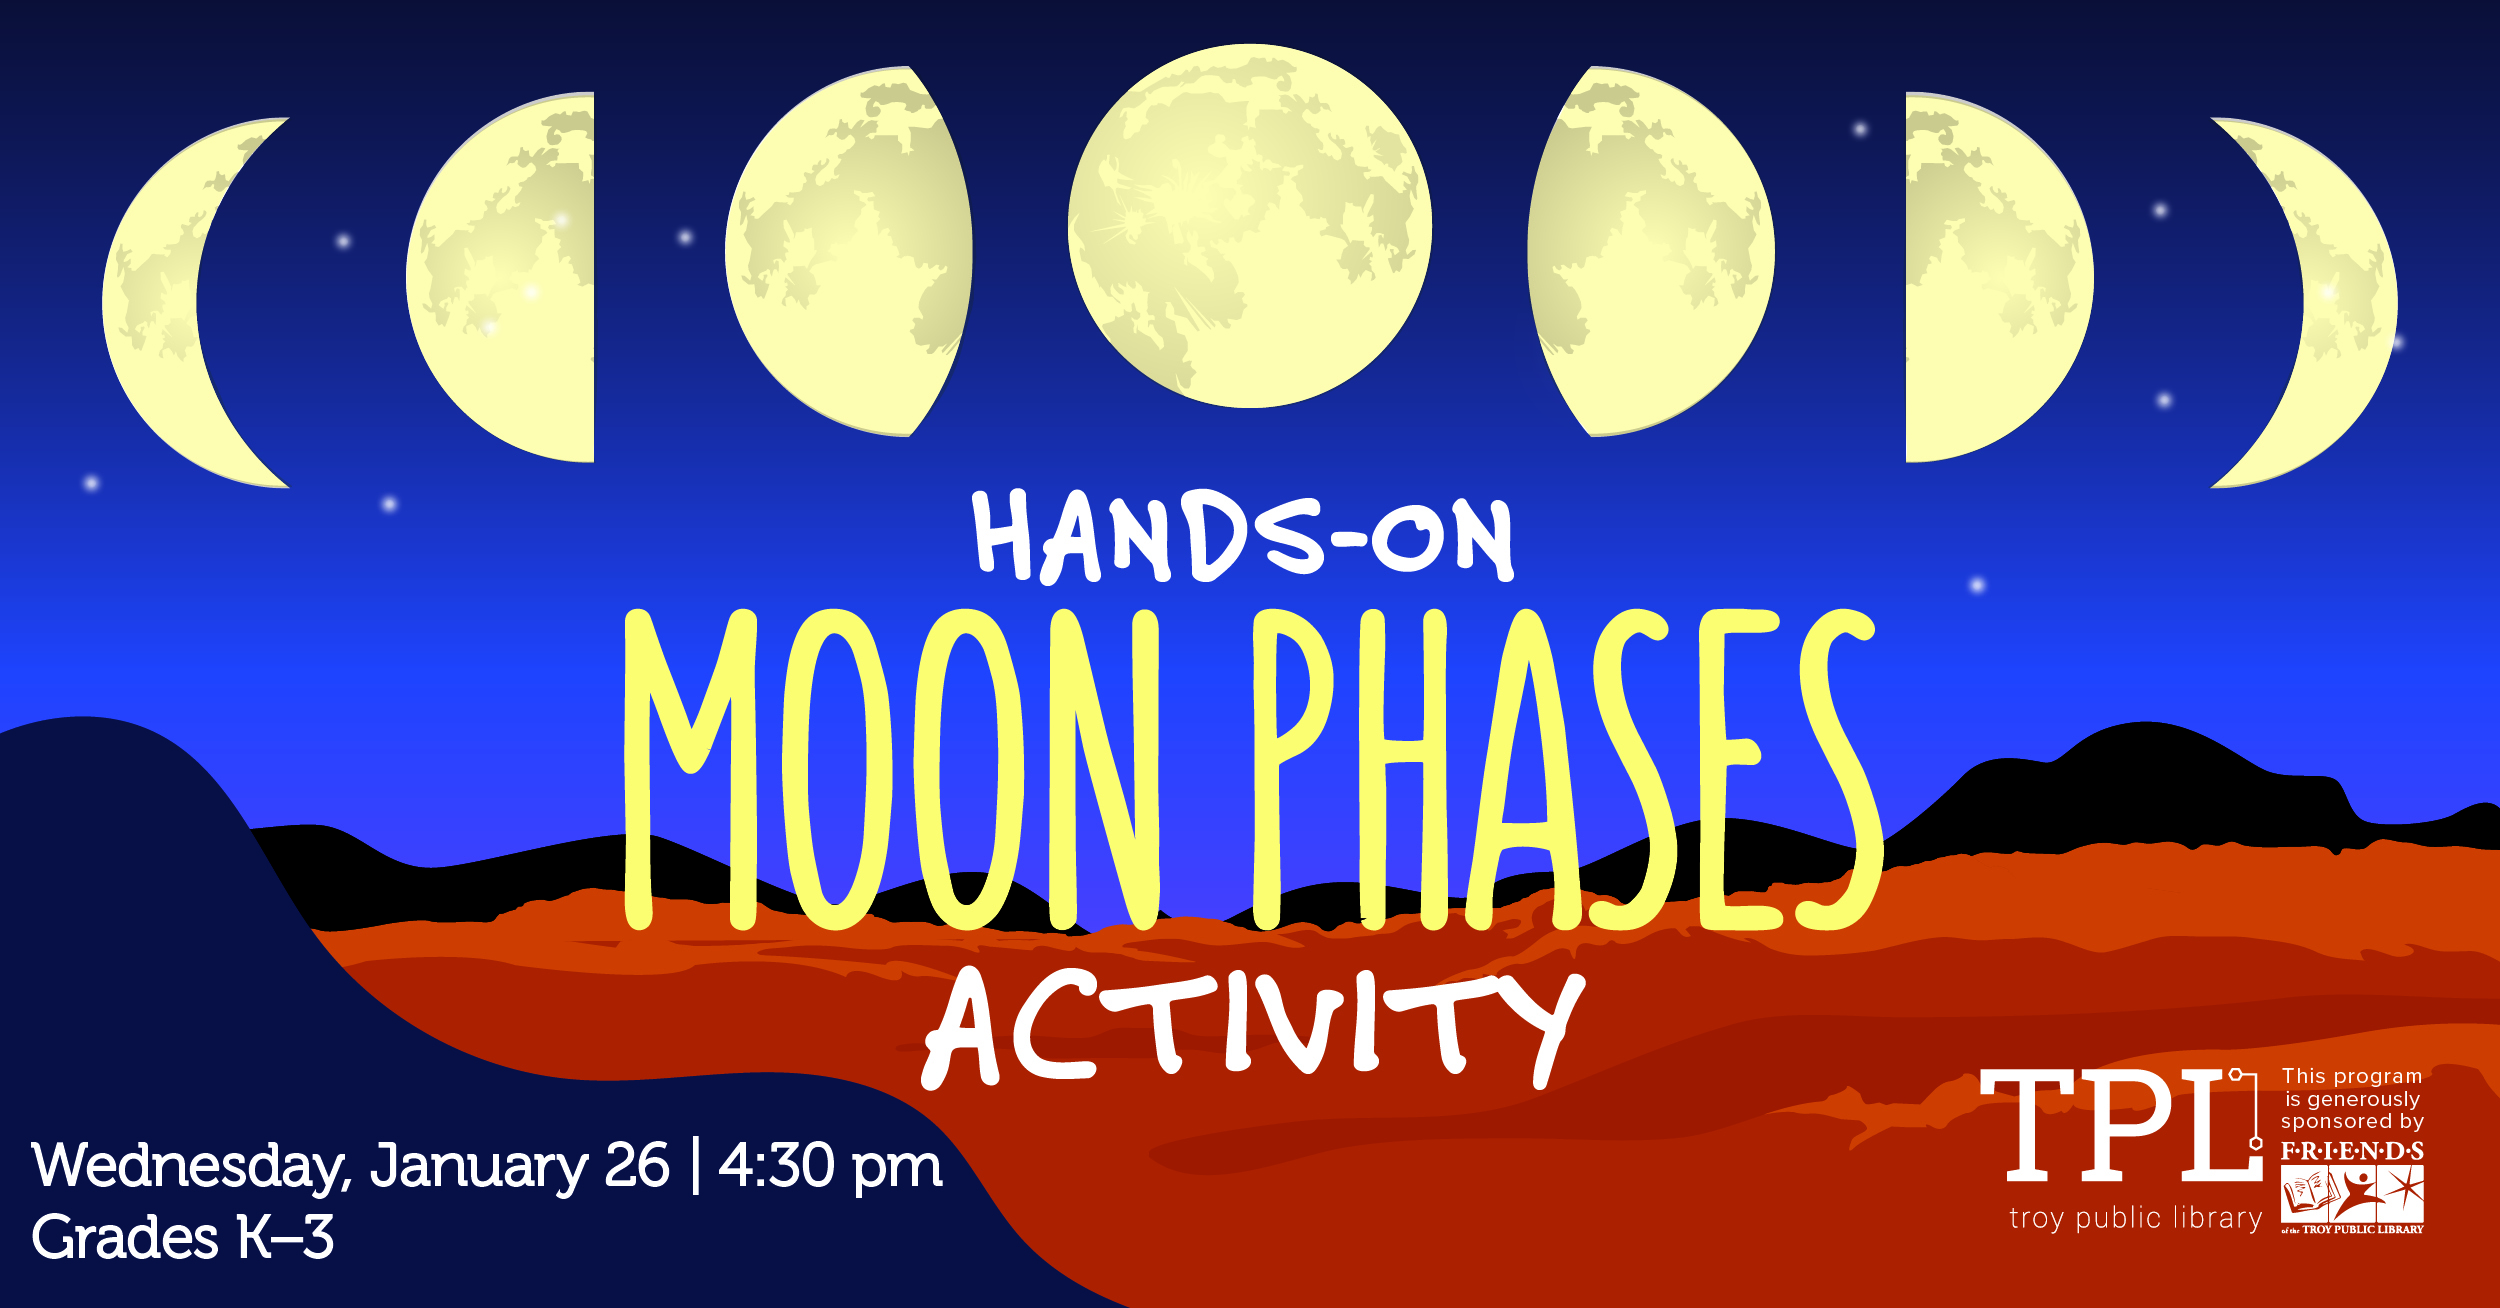 Hands-On Moon Phases Activity Wednesday, January 26 at 4:30pm, Grades K-3. Sponsored by the Friends of the Troy Public Library